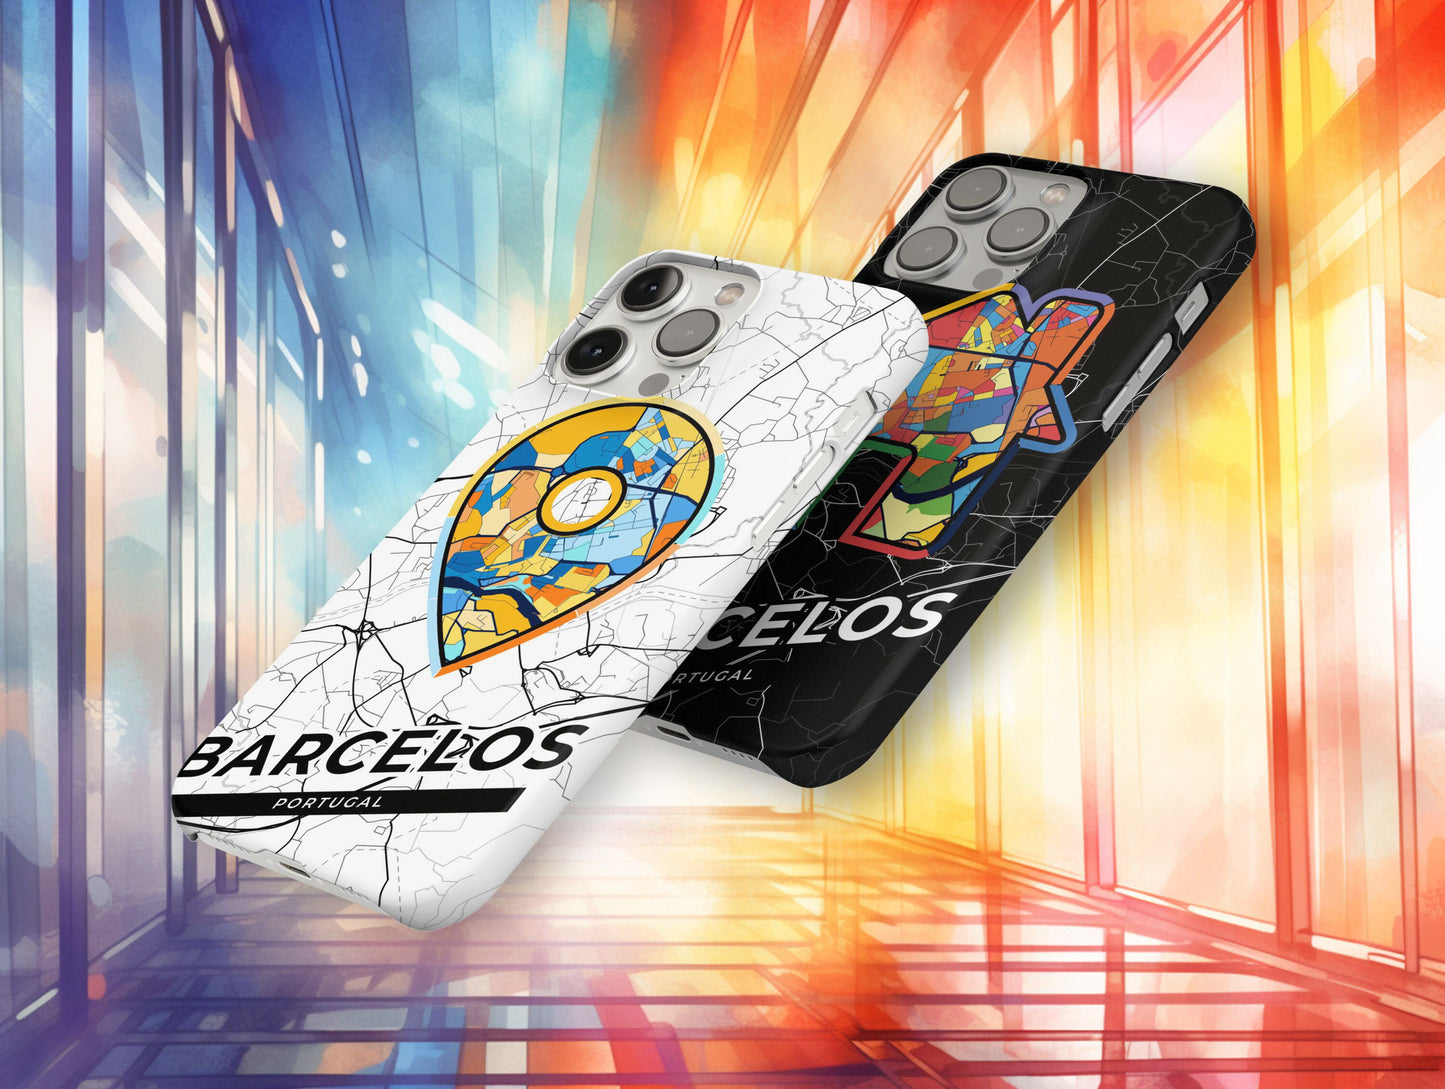 Barcelos Portugal slim phone case with colorful icon. Birthday, wedding or housewarming gift. Couple match cases.